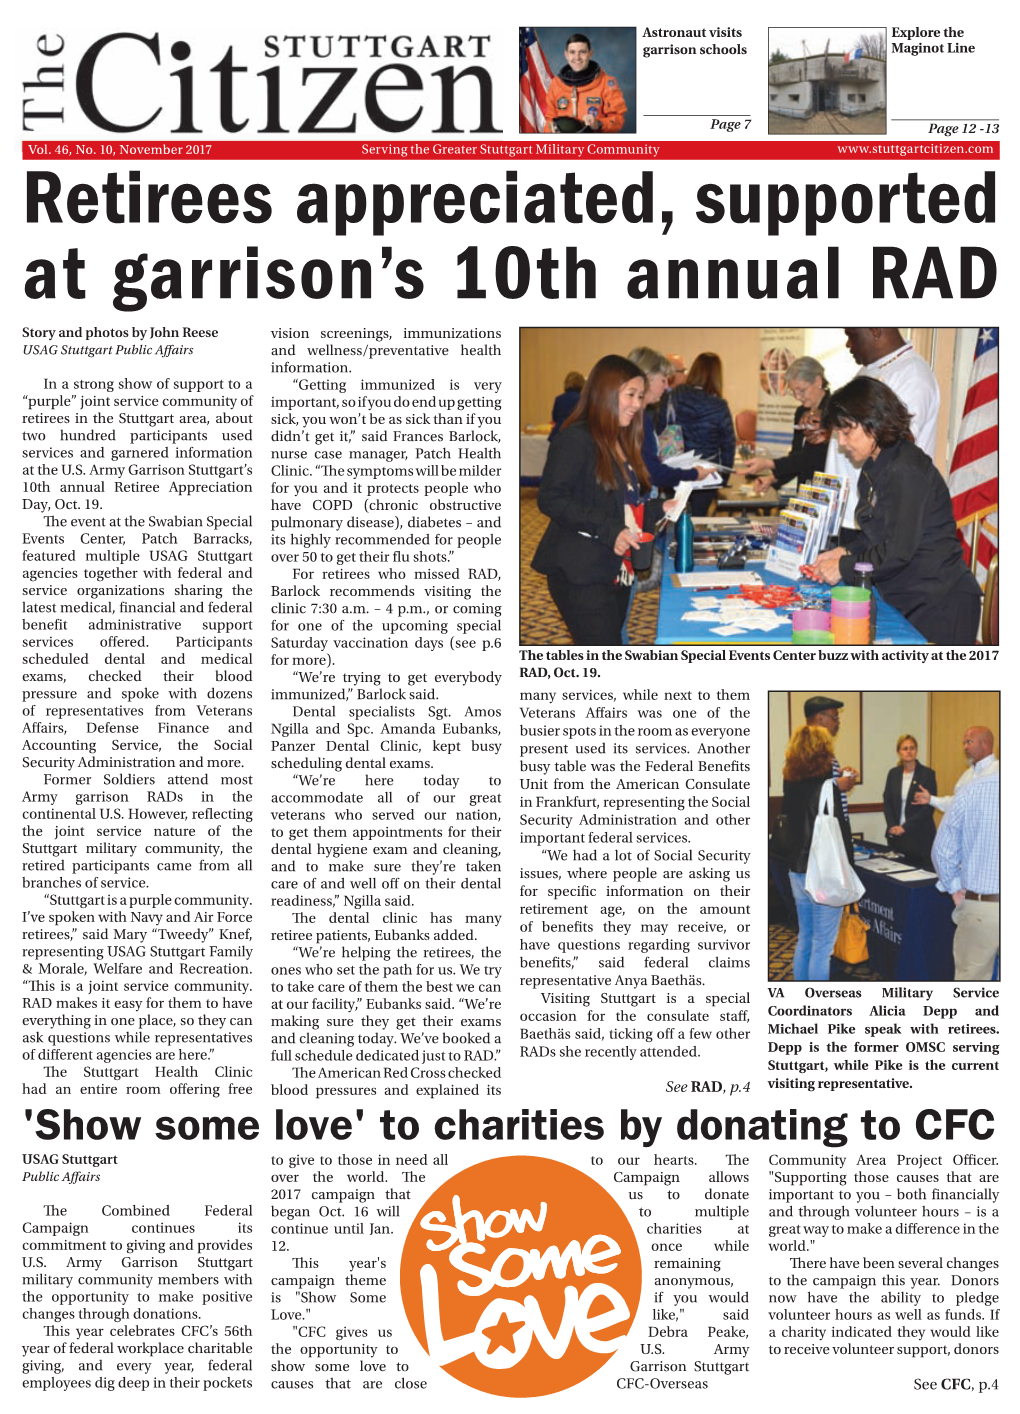 Retirees Appreciated, Supported at Garrison's 10Th Annual